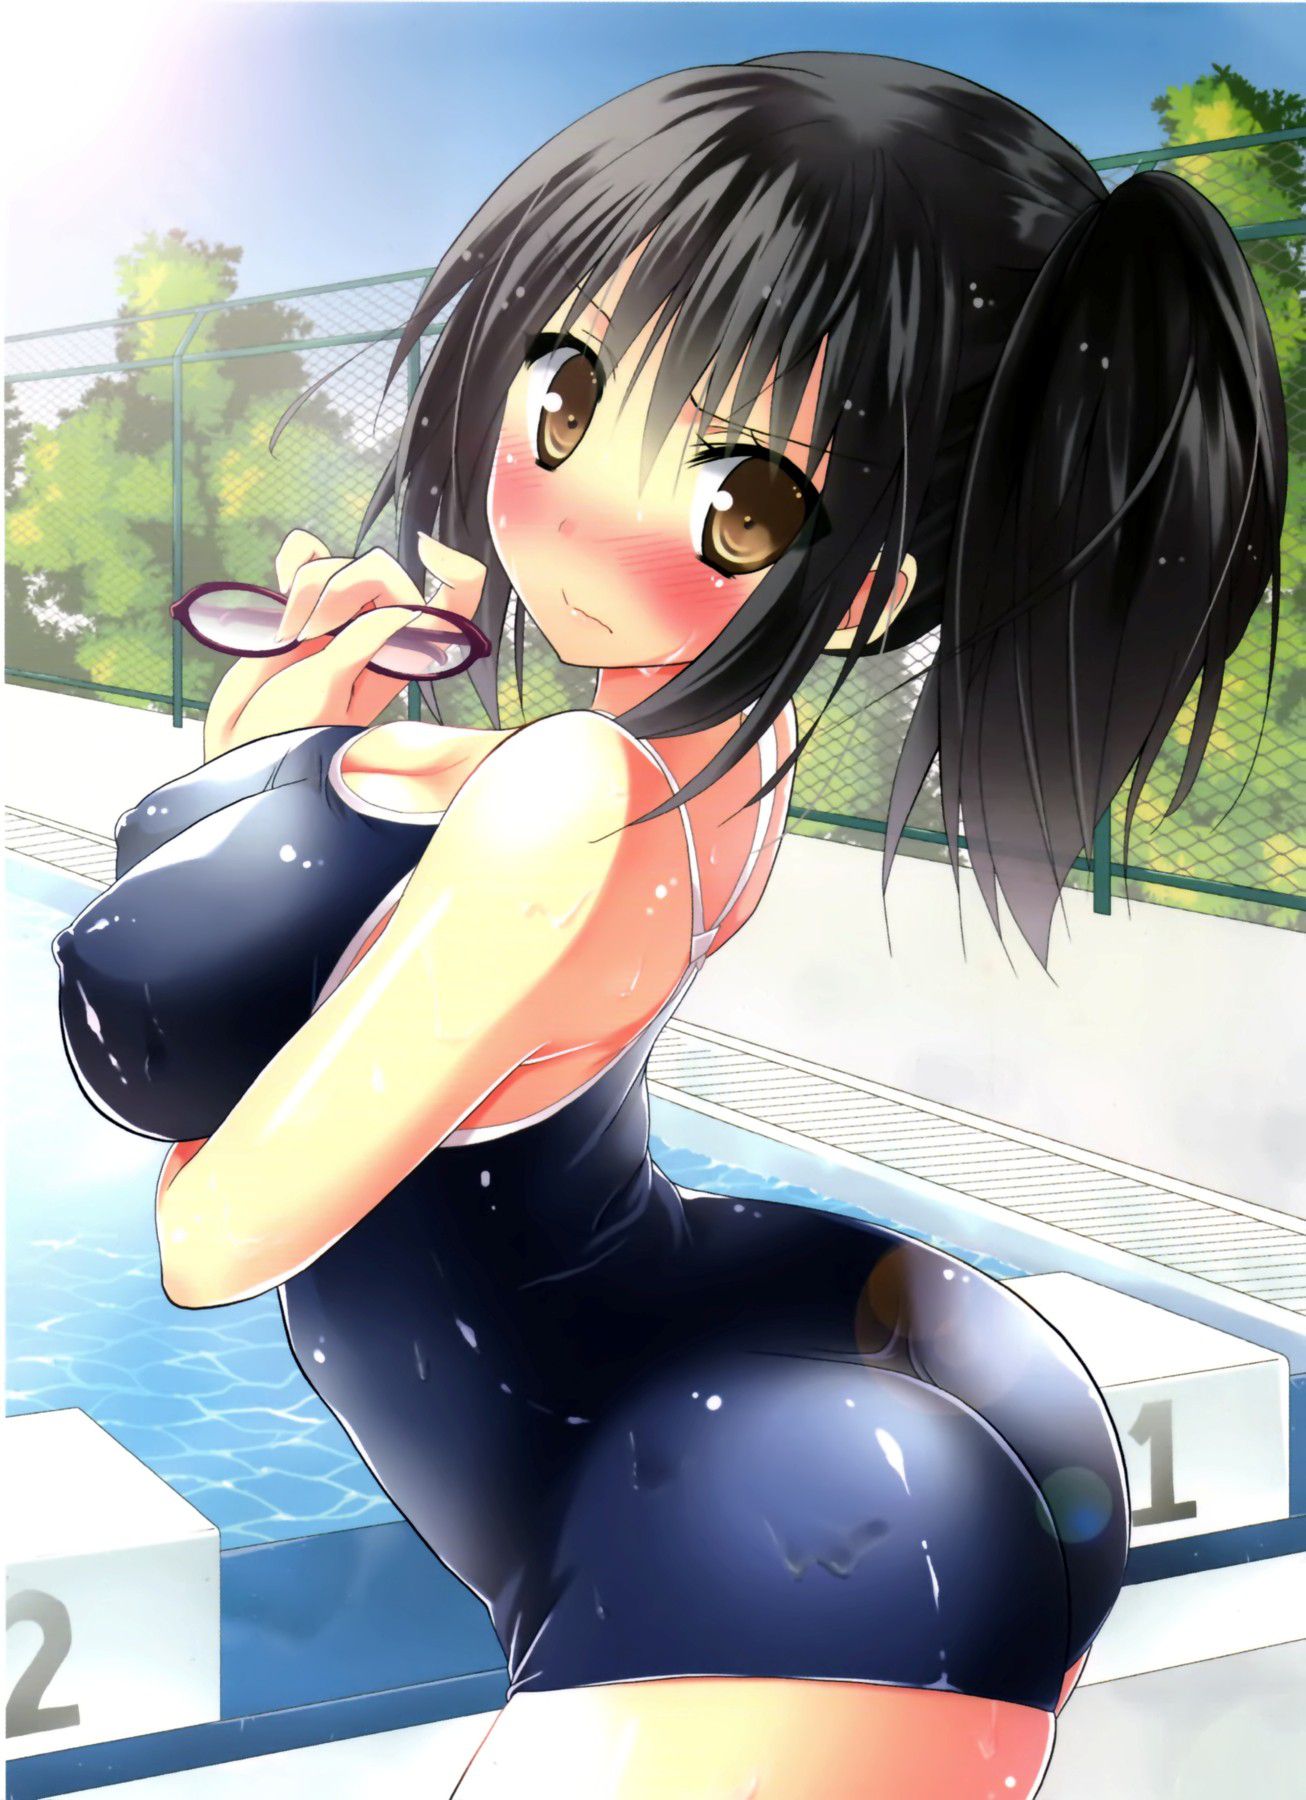 So the [bursting] busty child x a bathing suit second erotic pictures 40